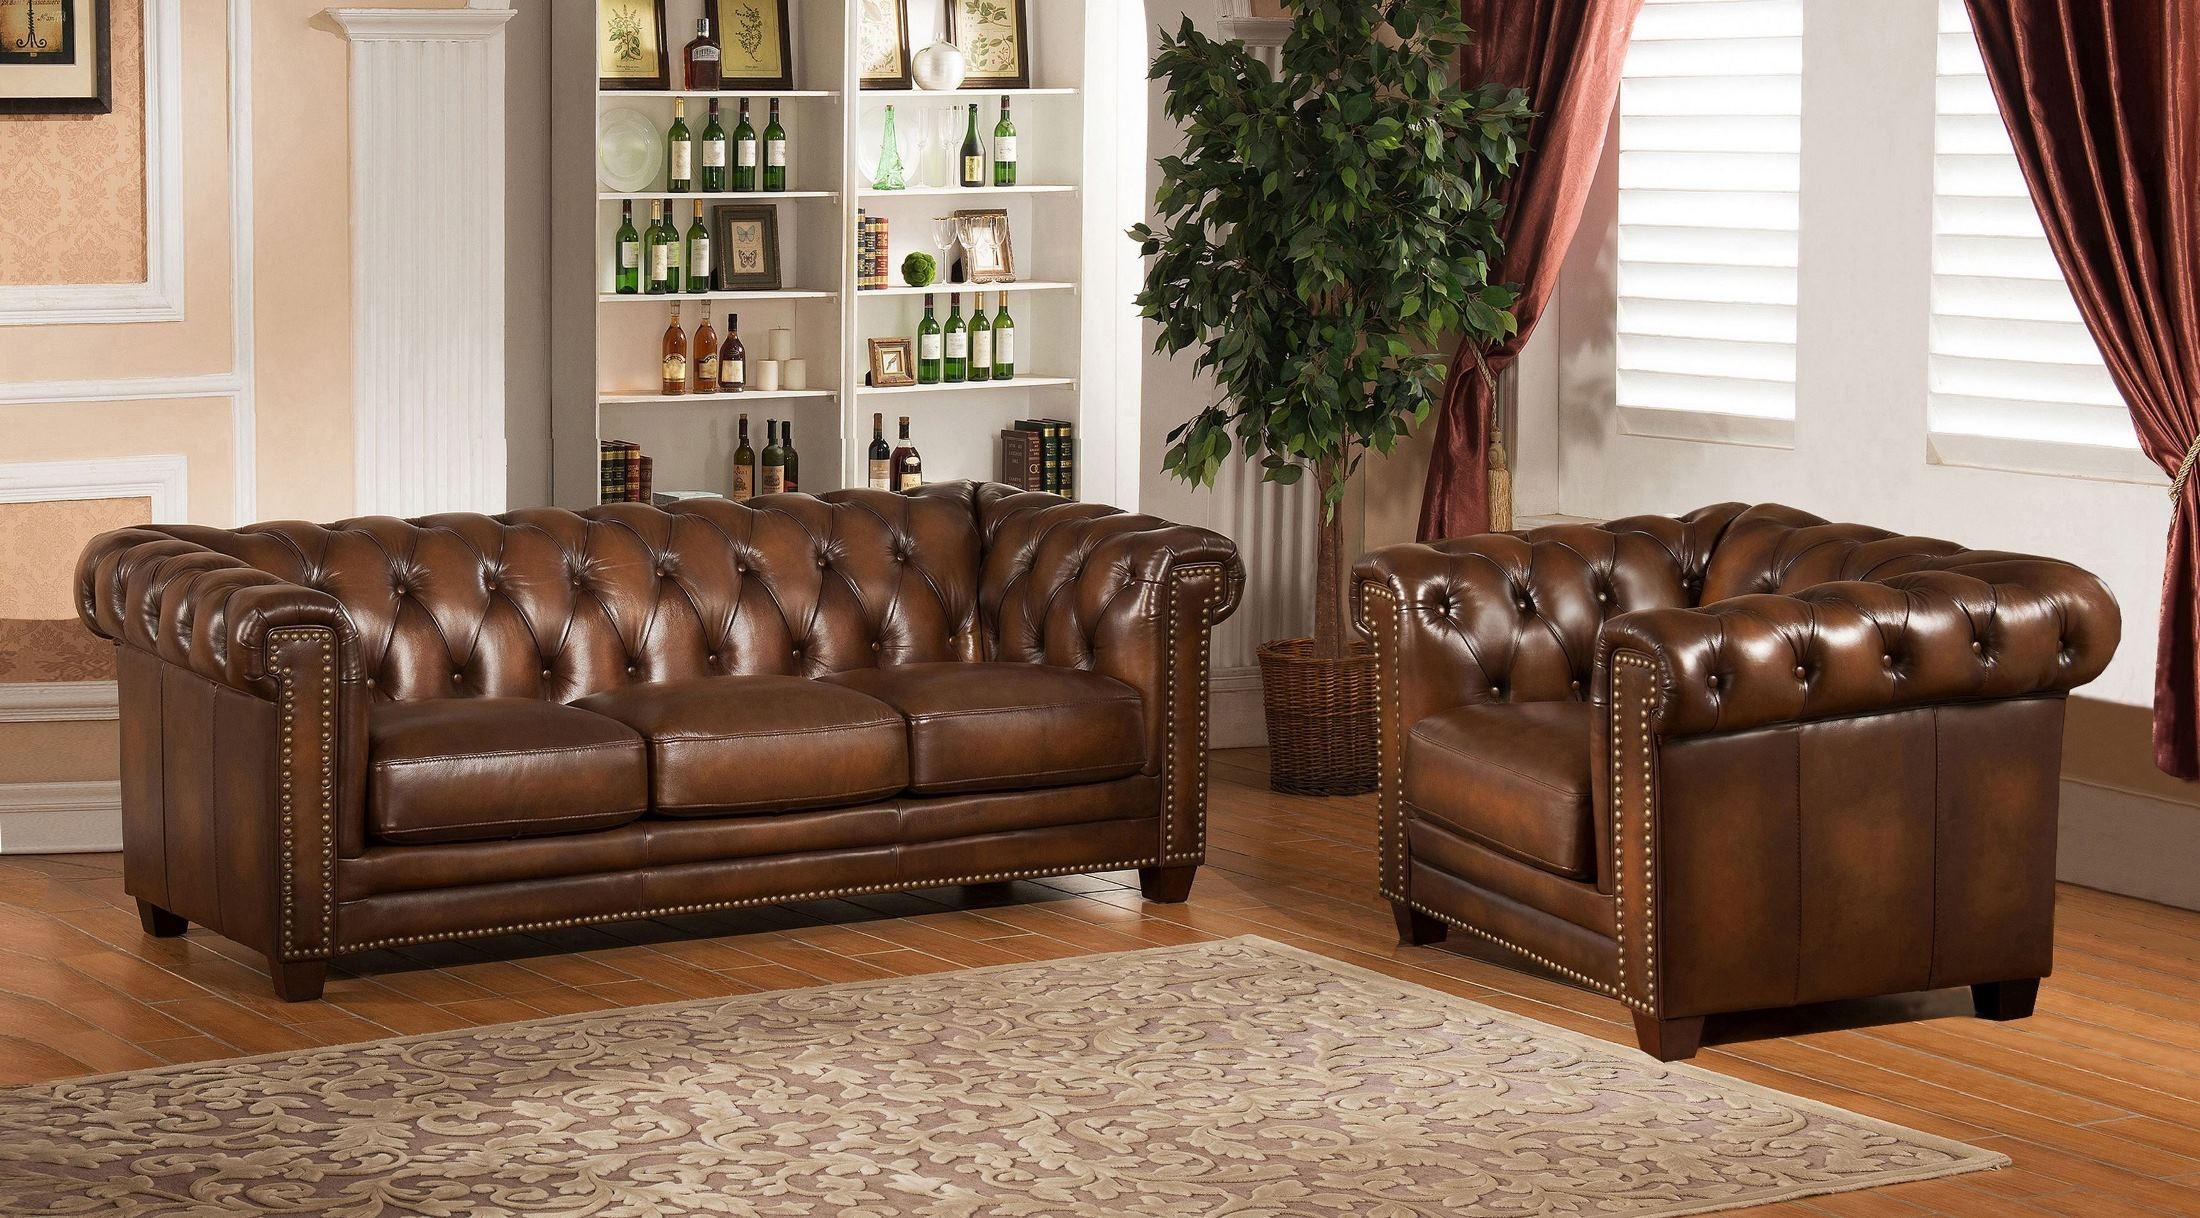 

    
Amax Leather Stanley Park II Arm Chairs Olive Amax-Stanley Park II-C9877C2839LS
